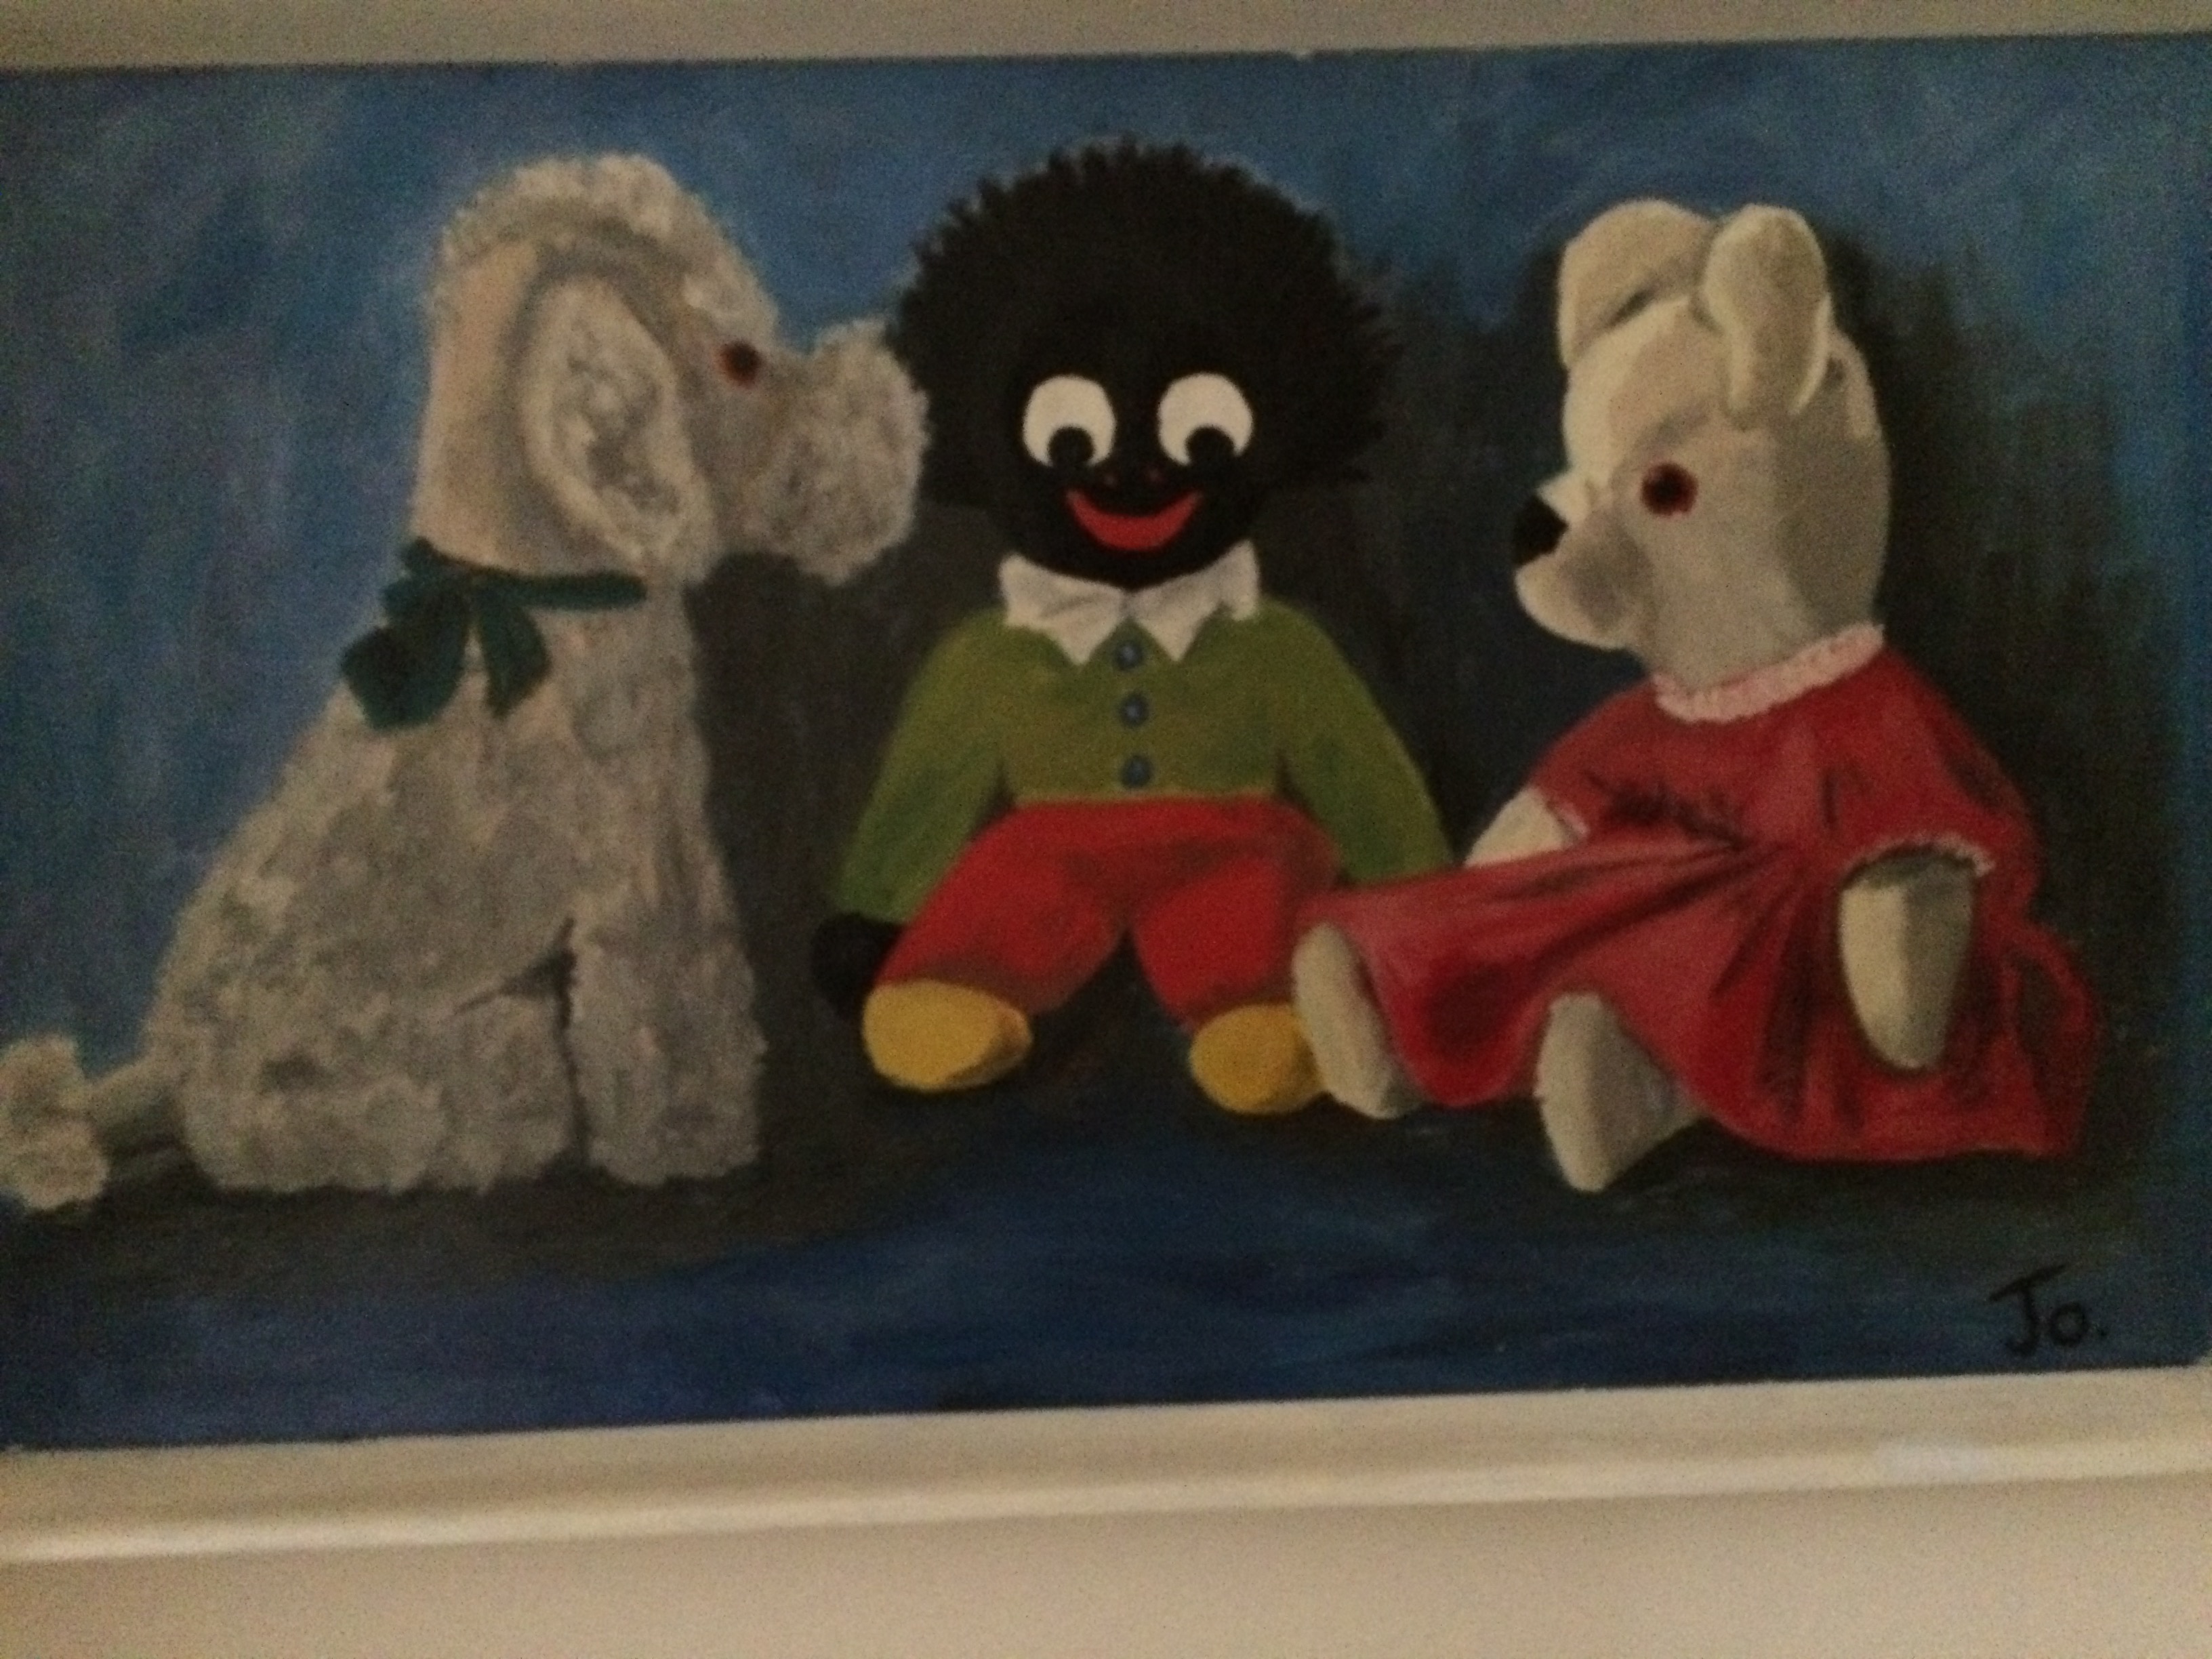 Poodle and Golliwog